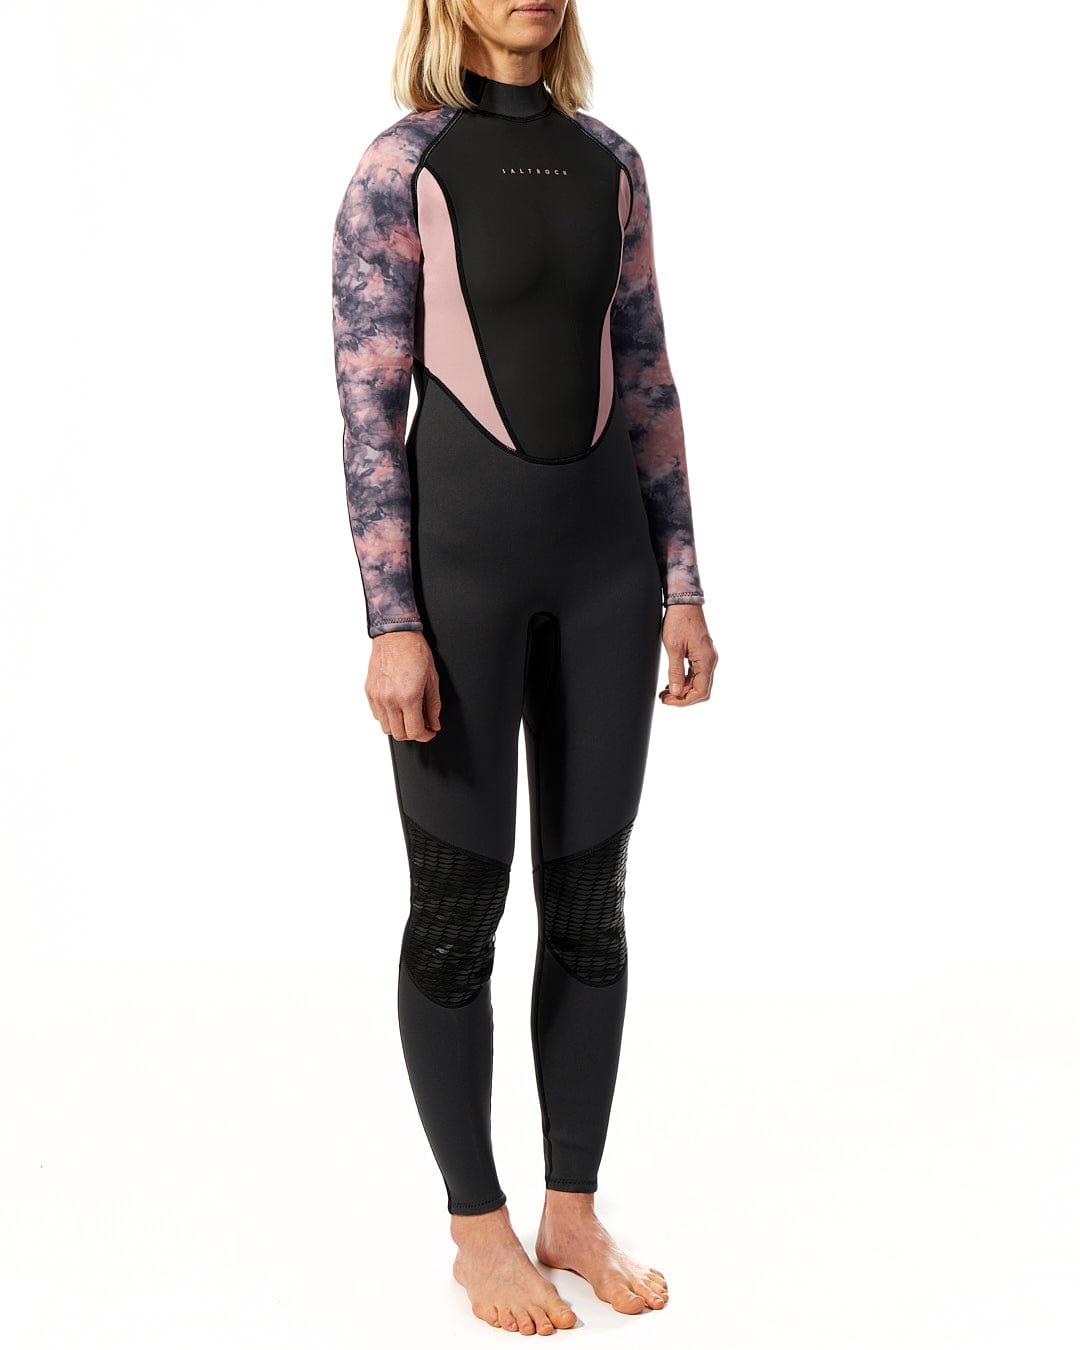 A woman wearing a Saltrock Vision - Womens 3/2 Back Zip Wetsuit - Light Pink standing on a white background.